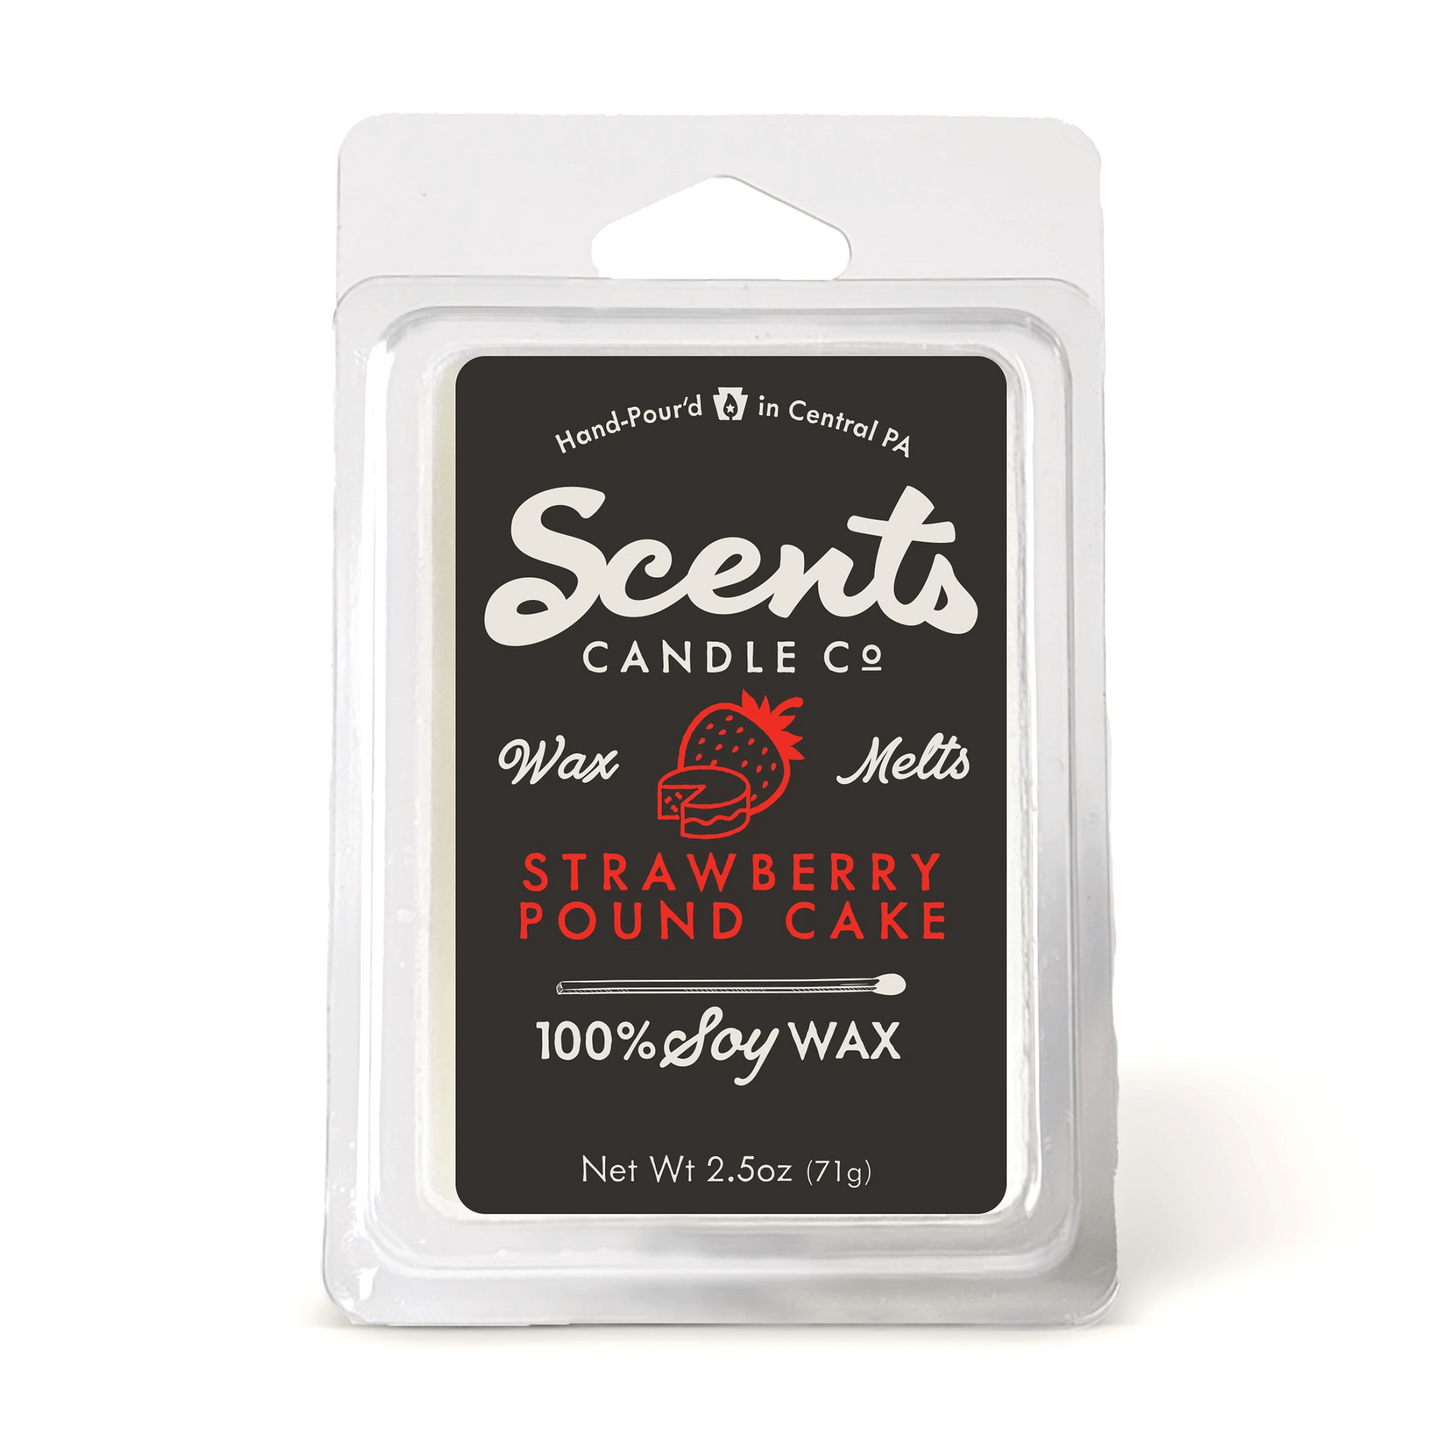 Scents Candle Co. Strawberry Pound Cake Wax Melt